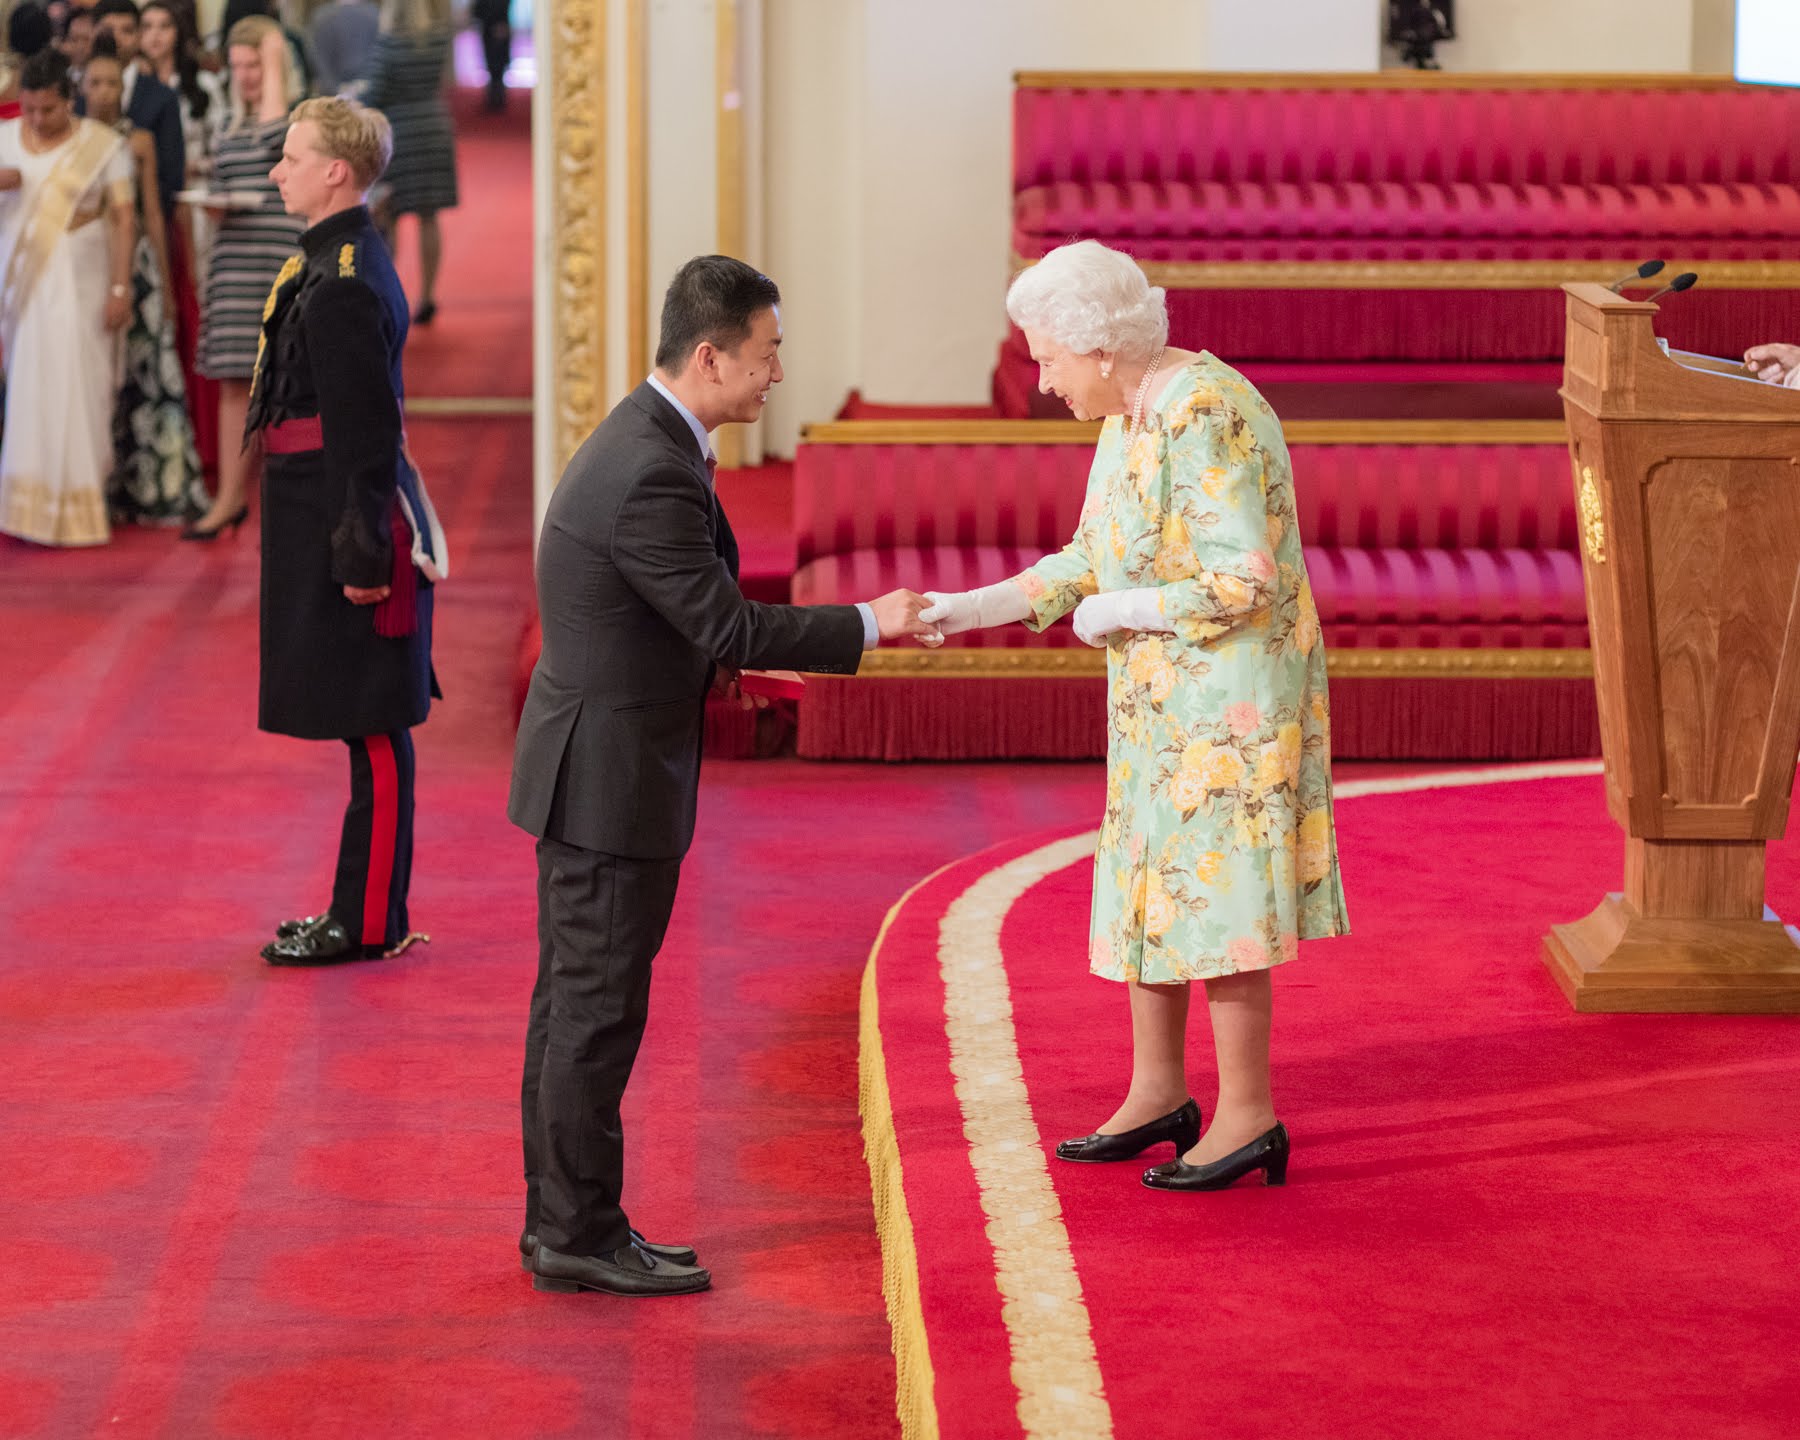 2018 Queens Young Leaders Award Winner Tian Sern from Singapore